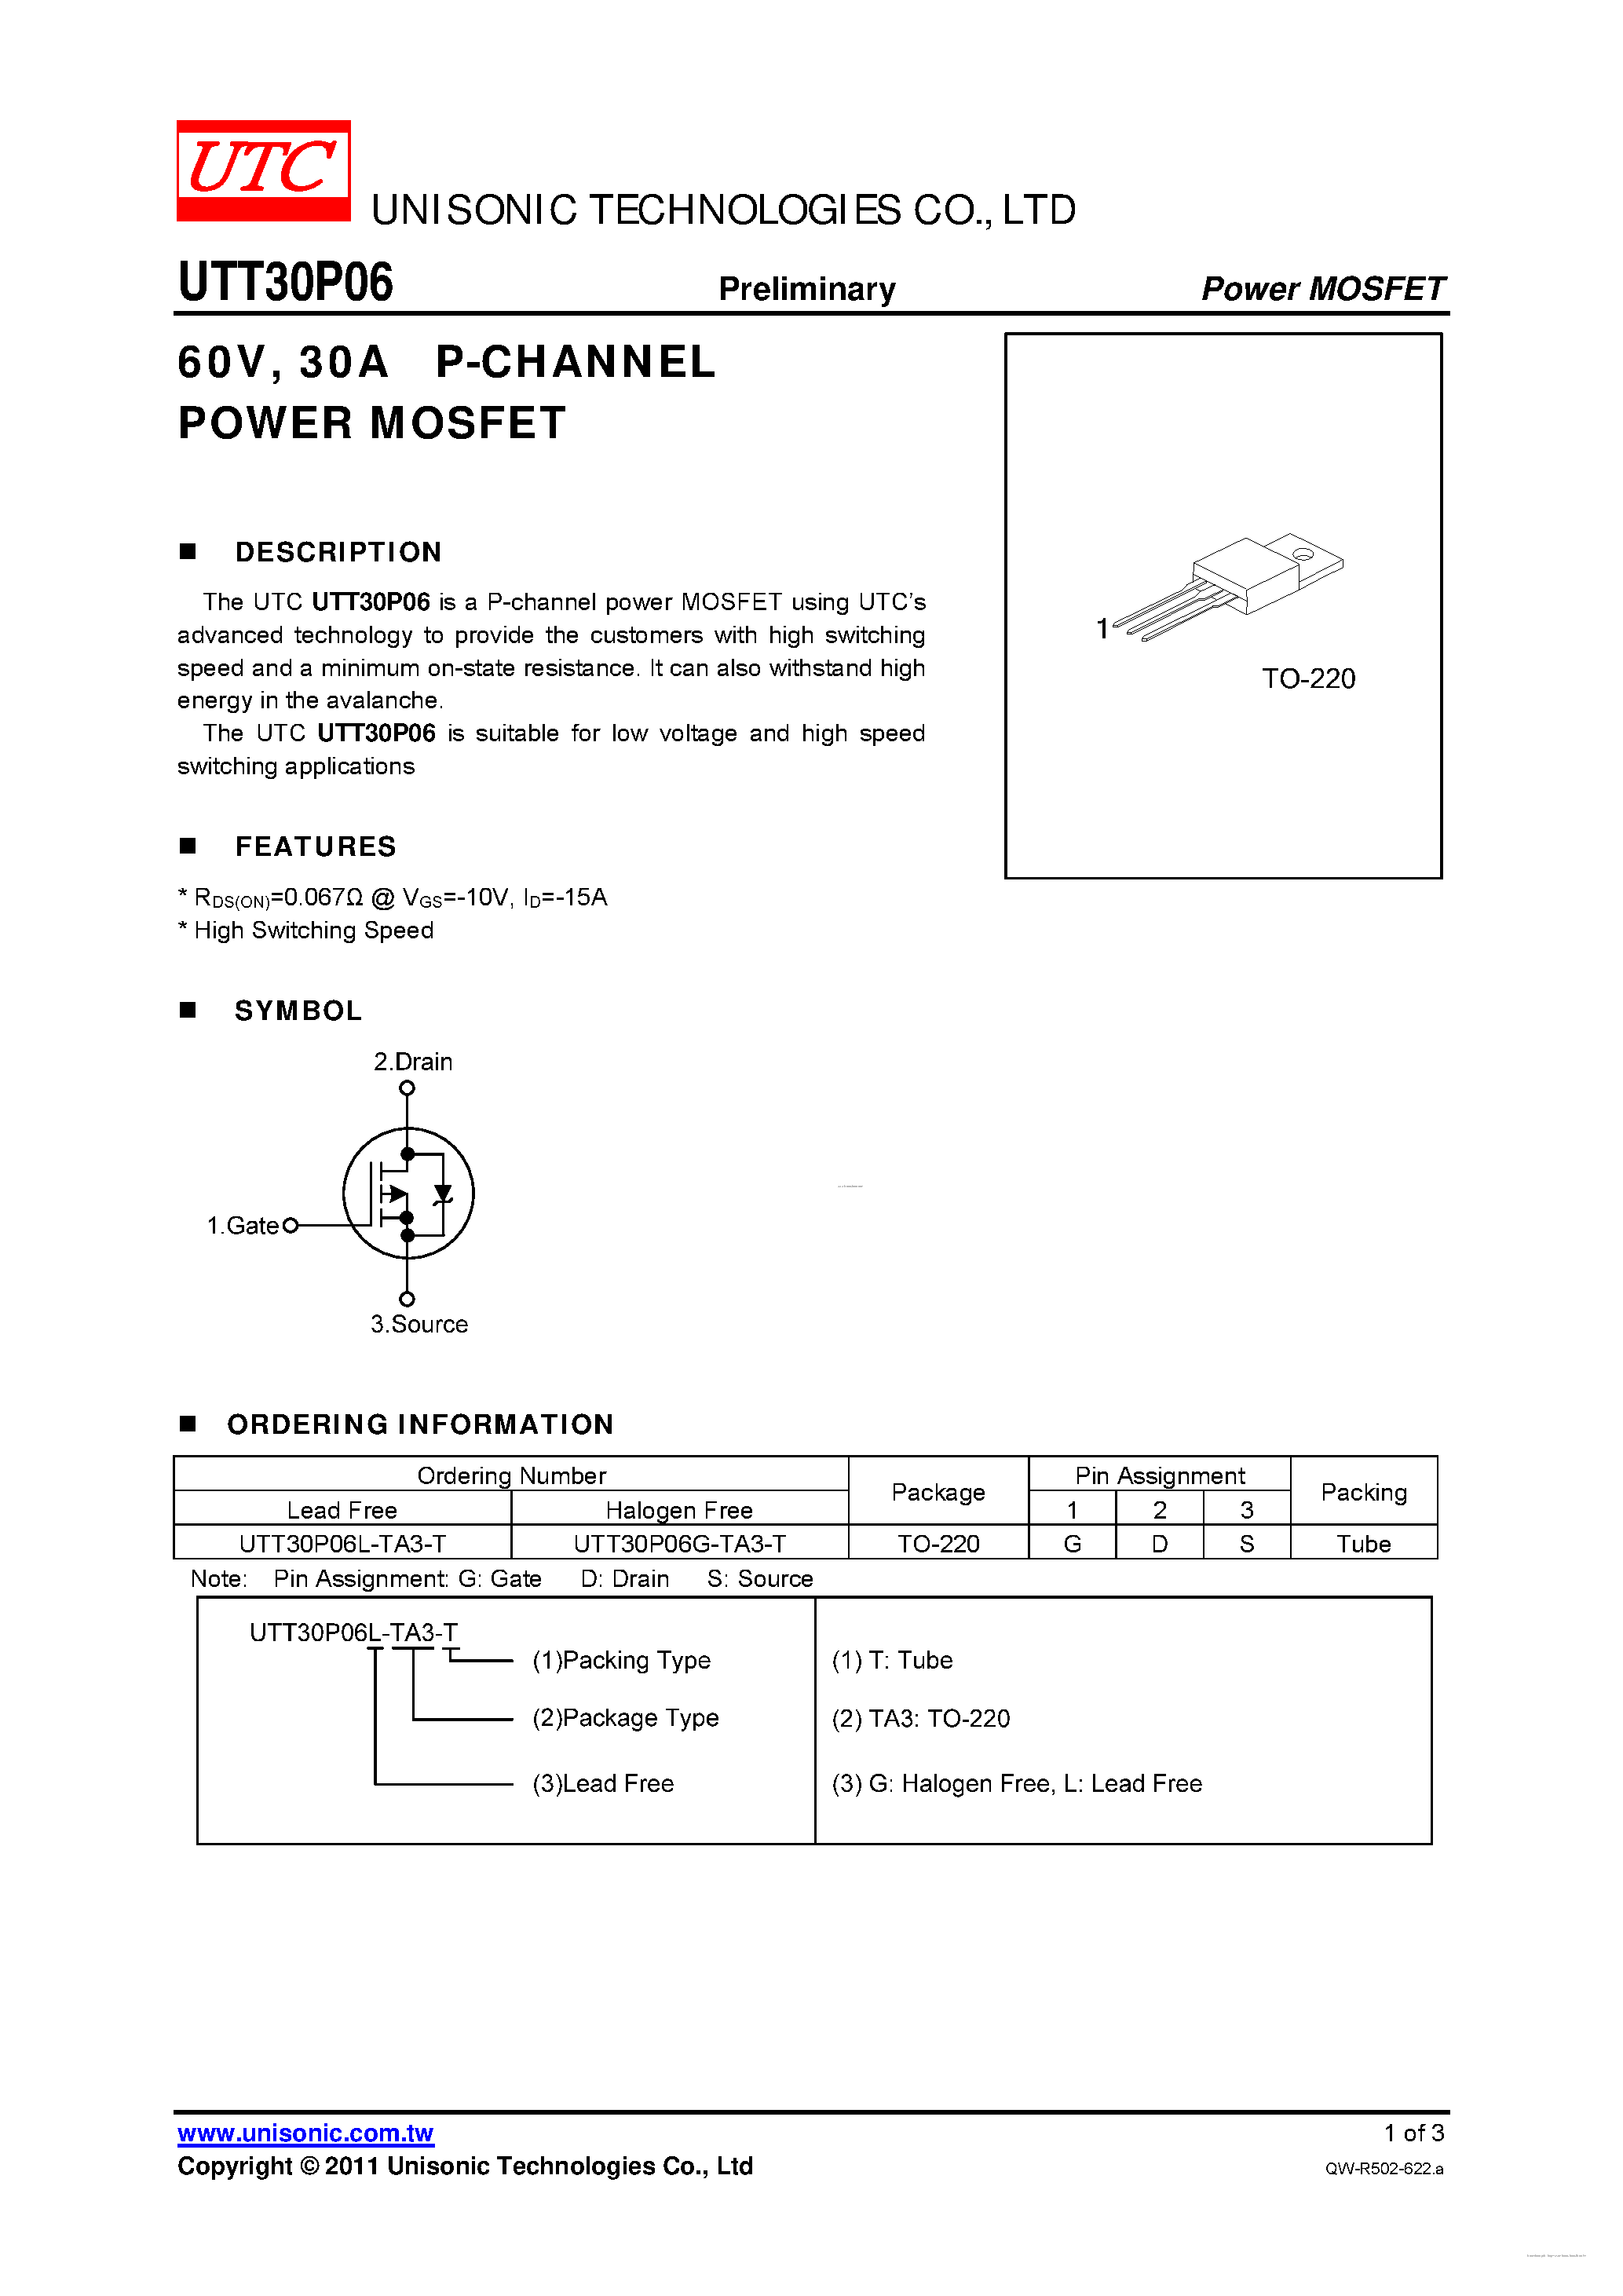 Даташит UTT30P06 - P-CHANNEL POWER MOSFET страница 1